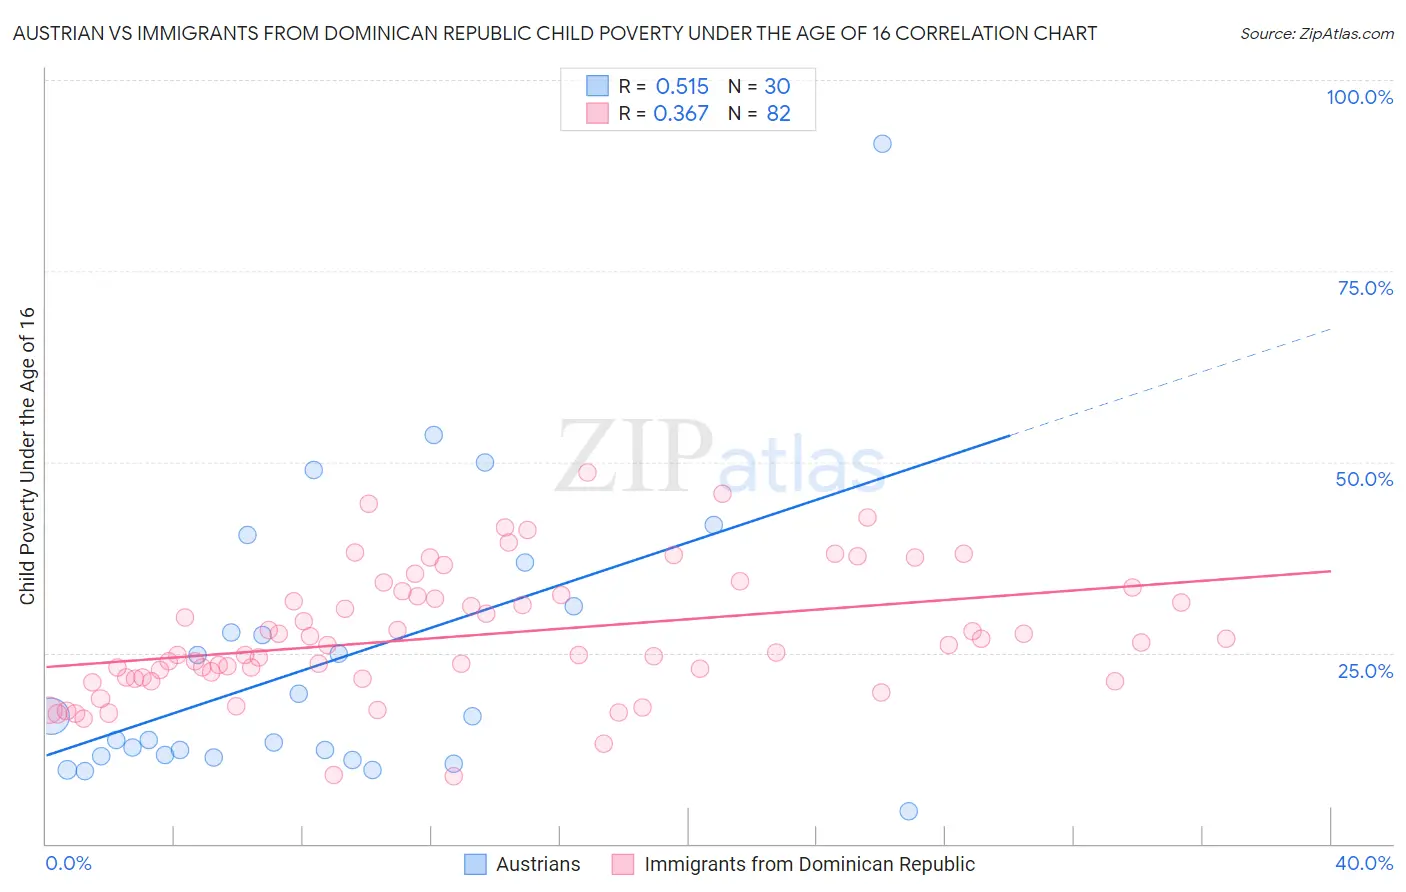 Austrian vs Immigrants from Dominican Republic Child Poverty Under the Age of 16